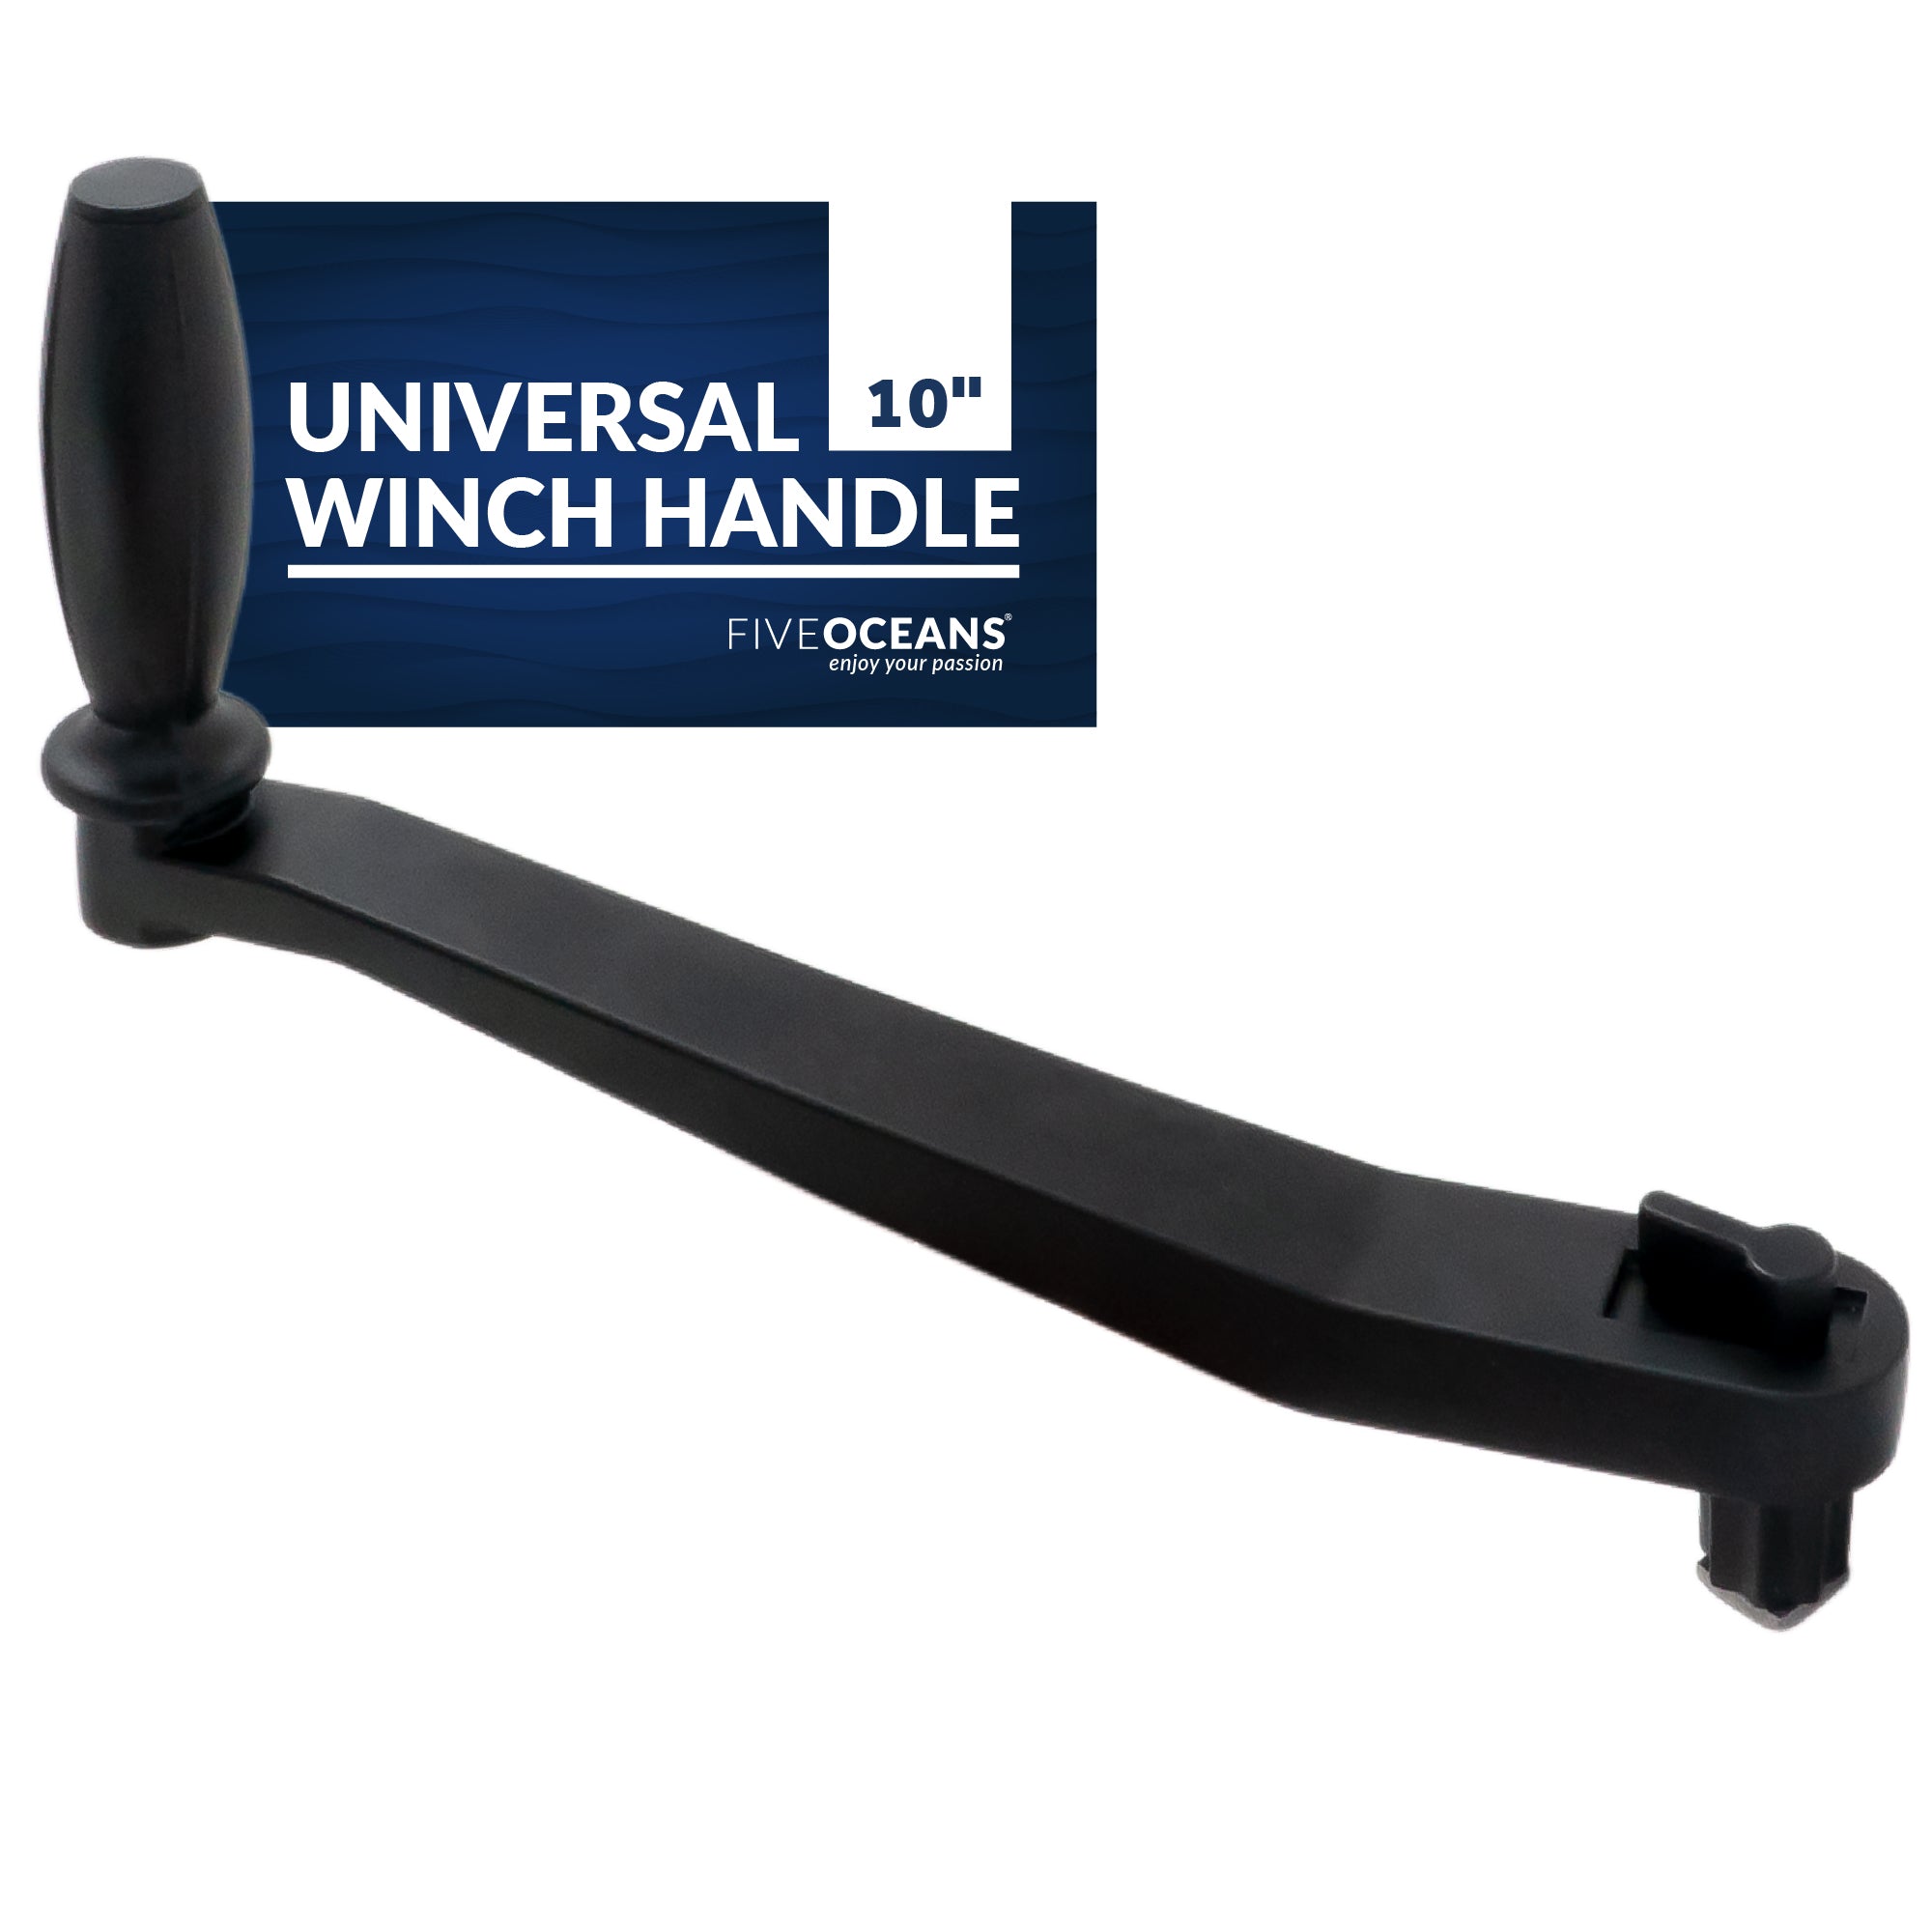 Universal Lock-in Style Winch Handle 10" - FO3514